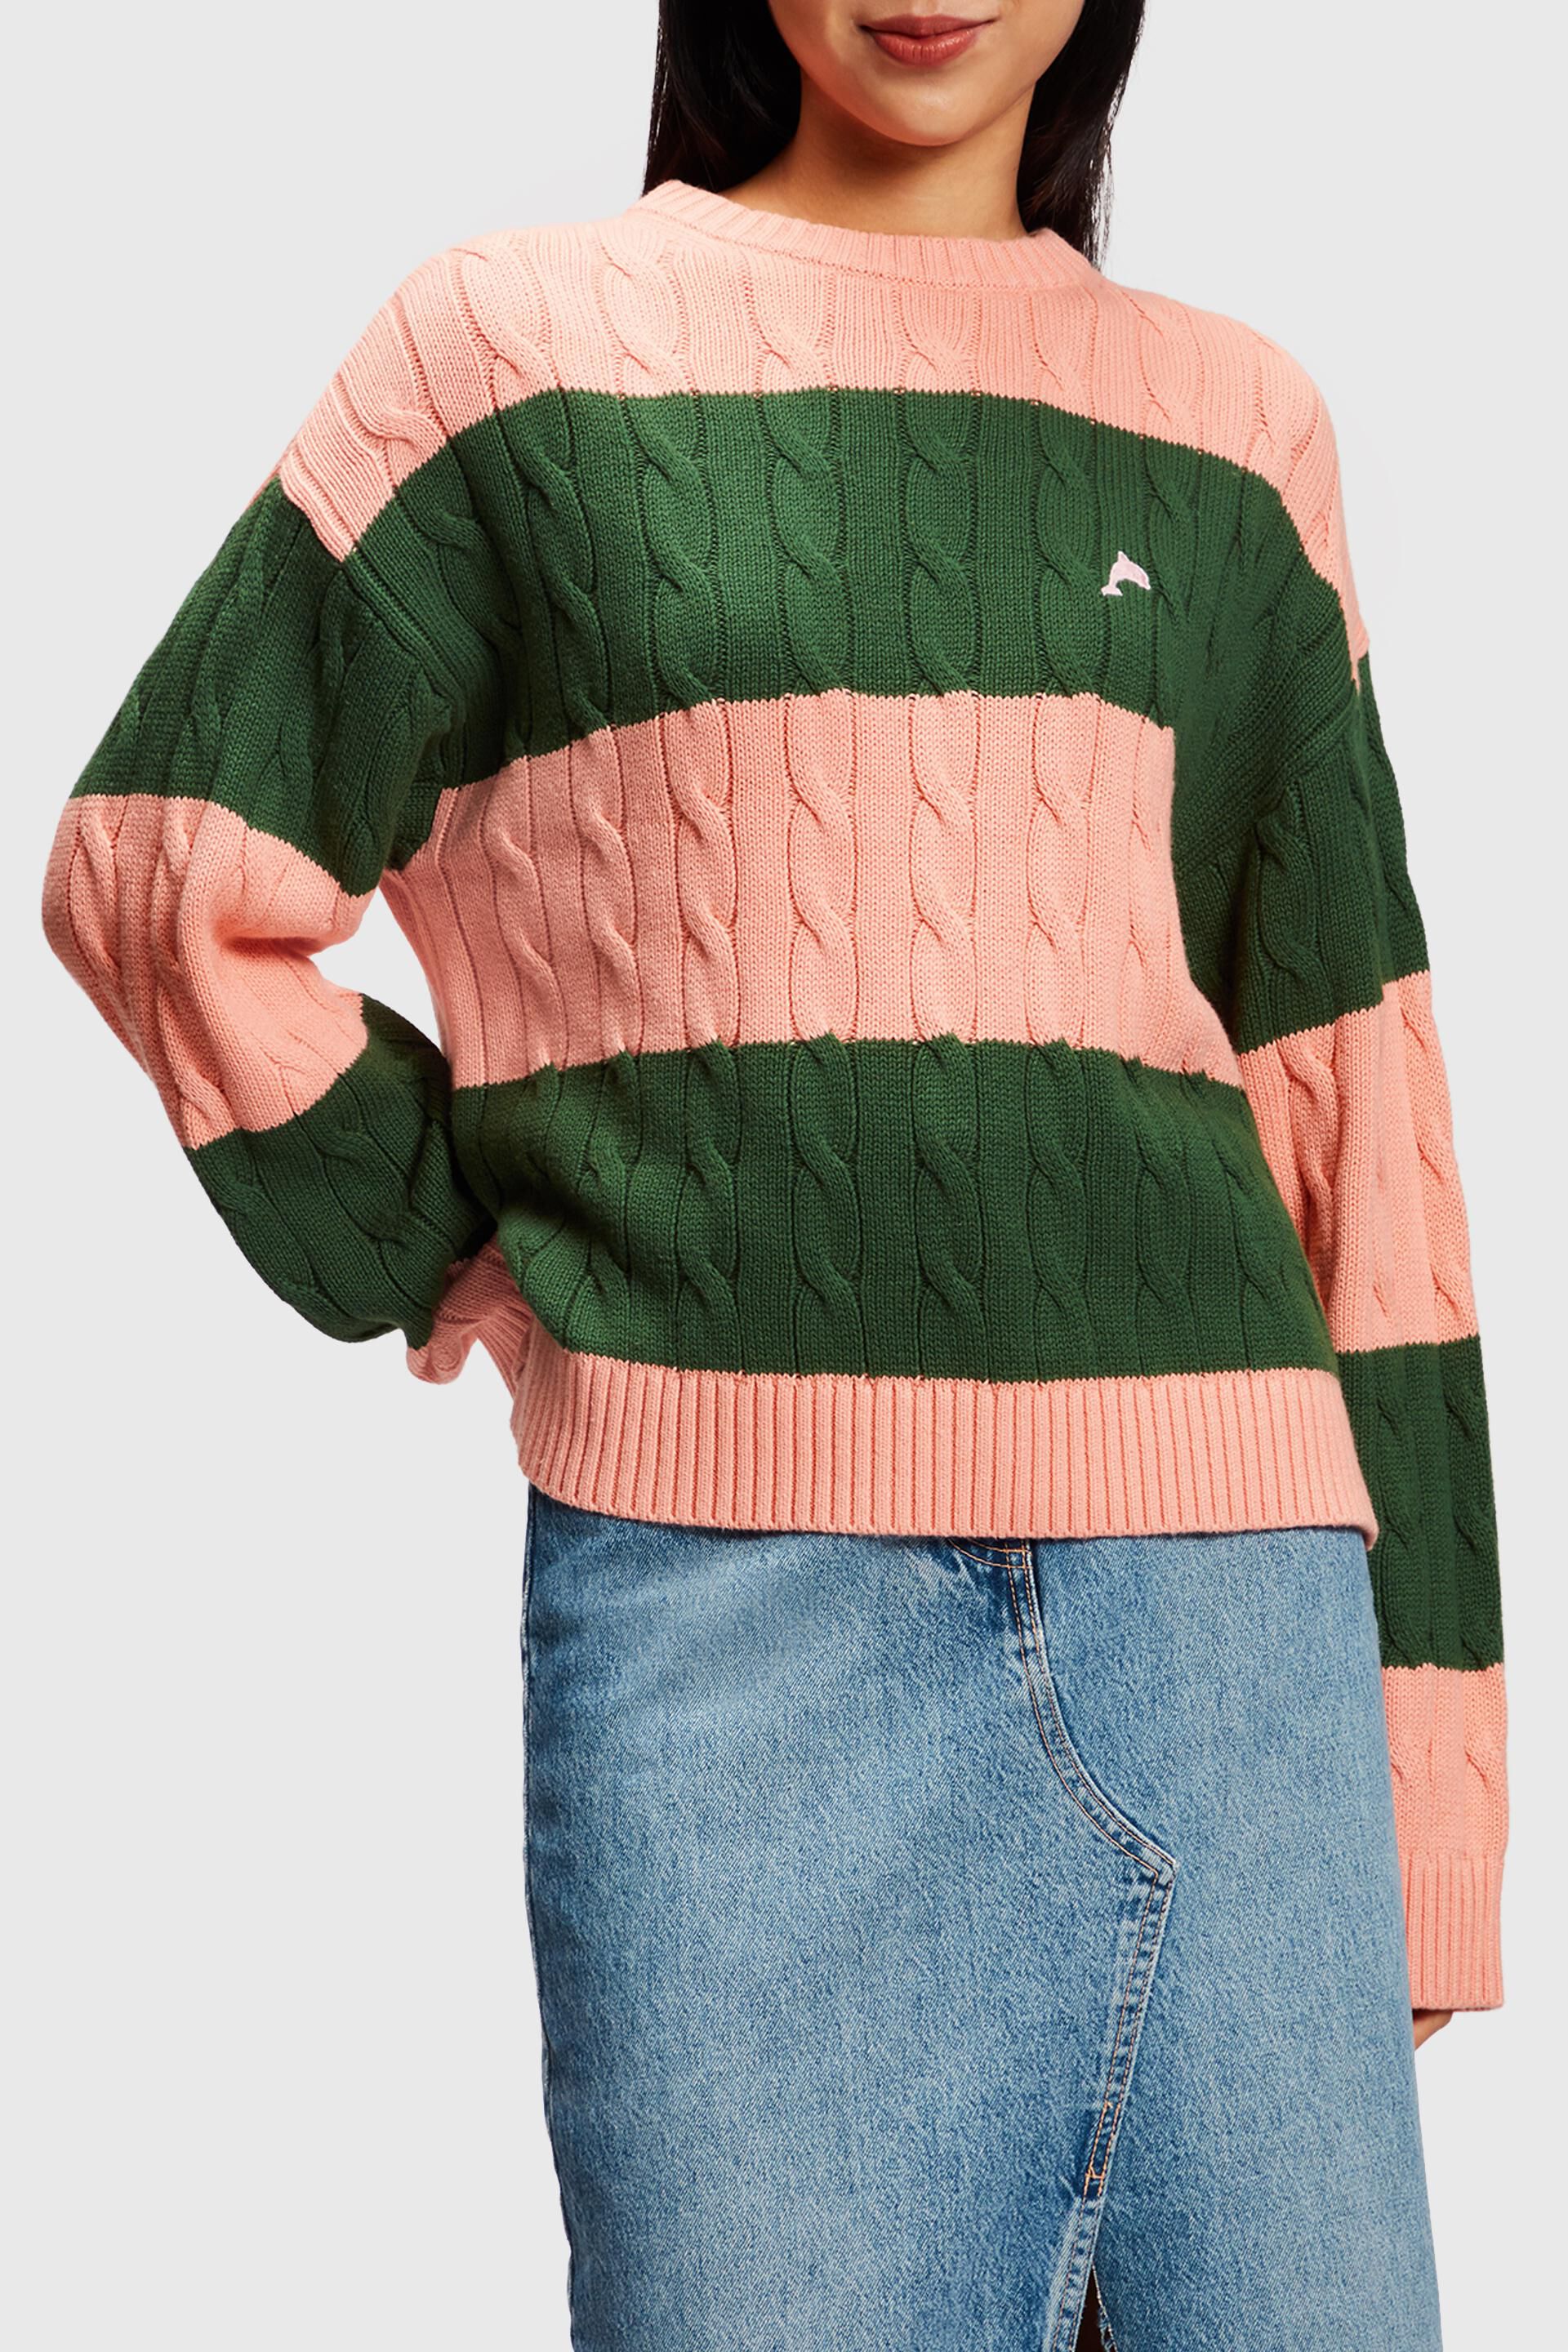 Esprit sweater cable Striped knit